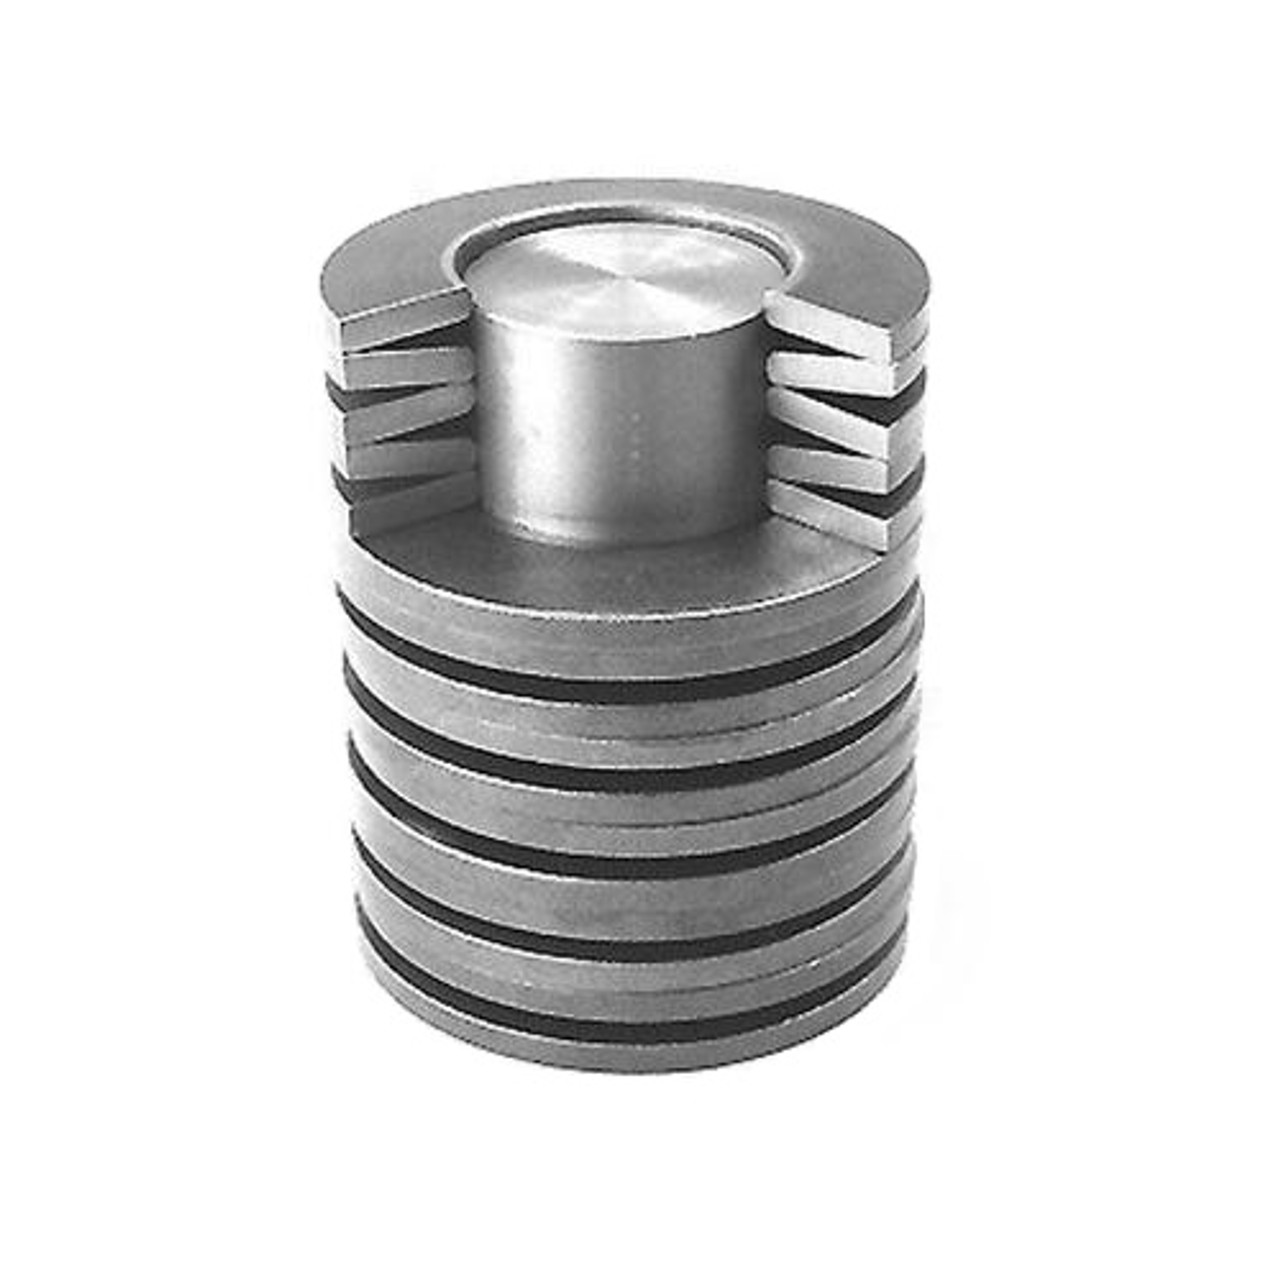 6mm Disc Spring (DIN 2093) Conical Washer  DS006.2-018-04